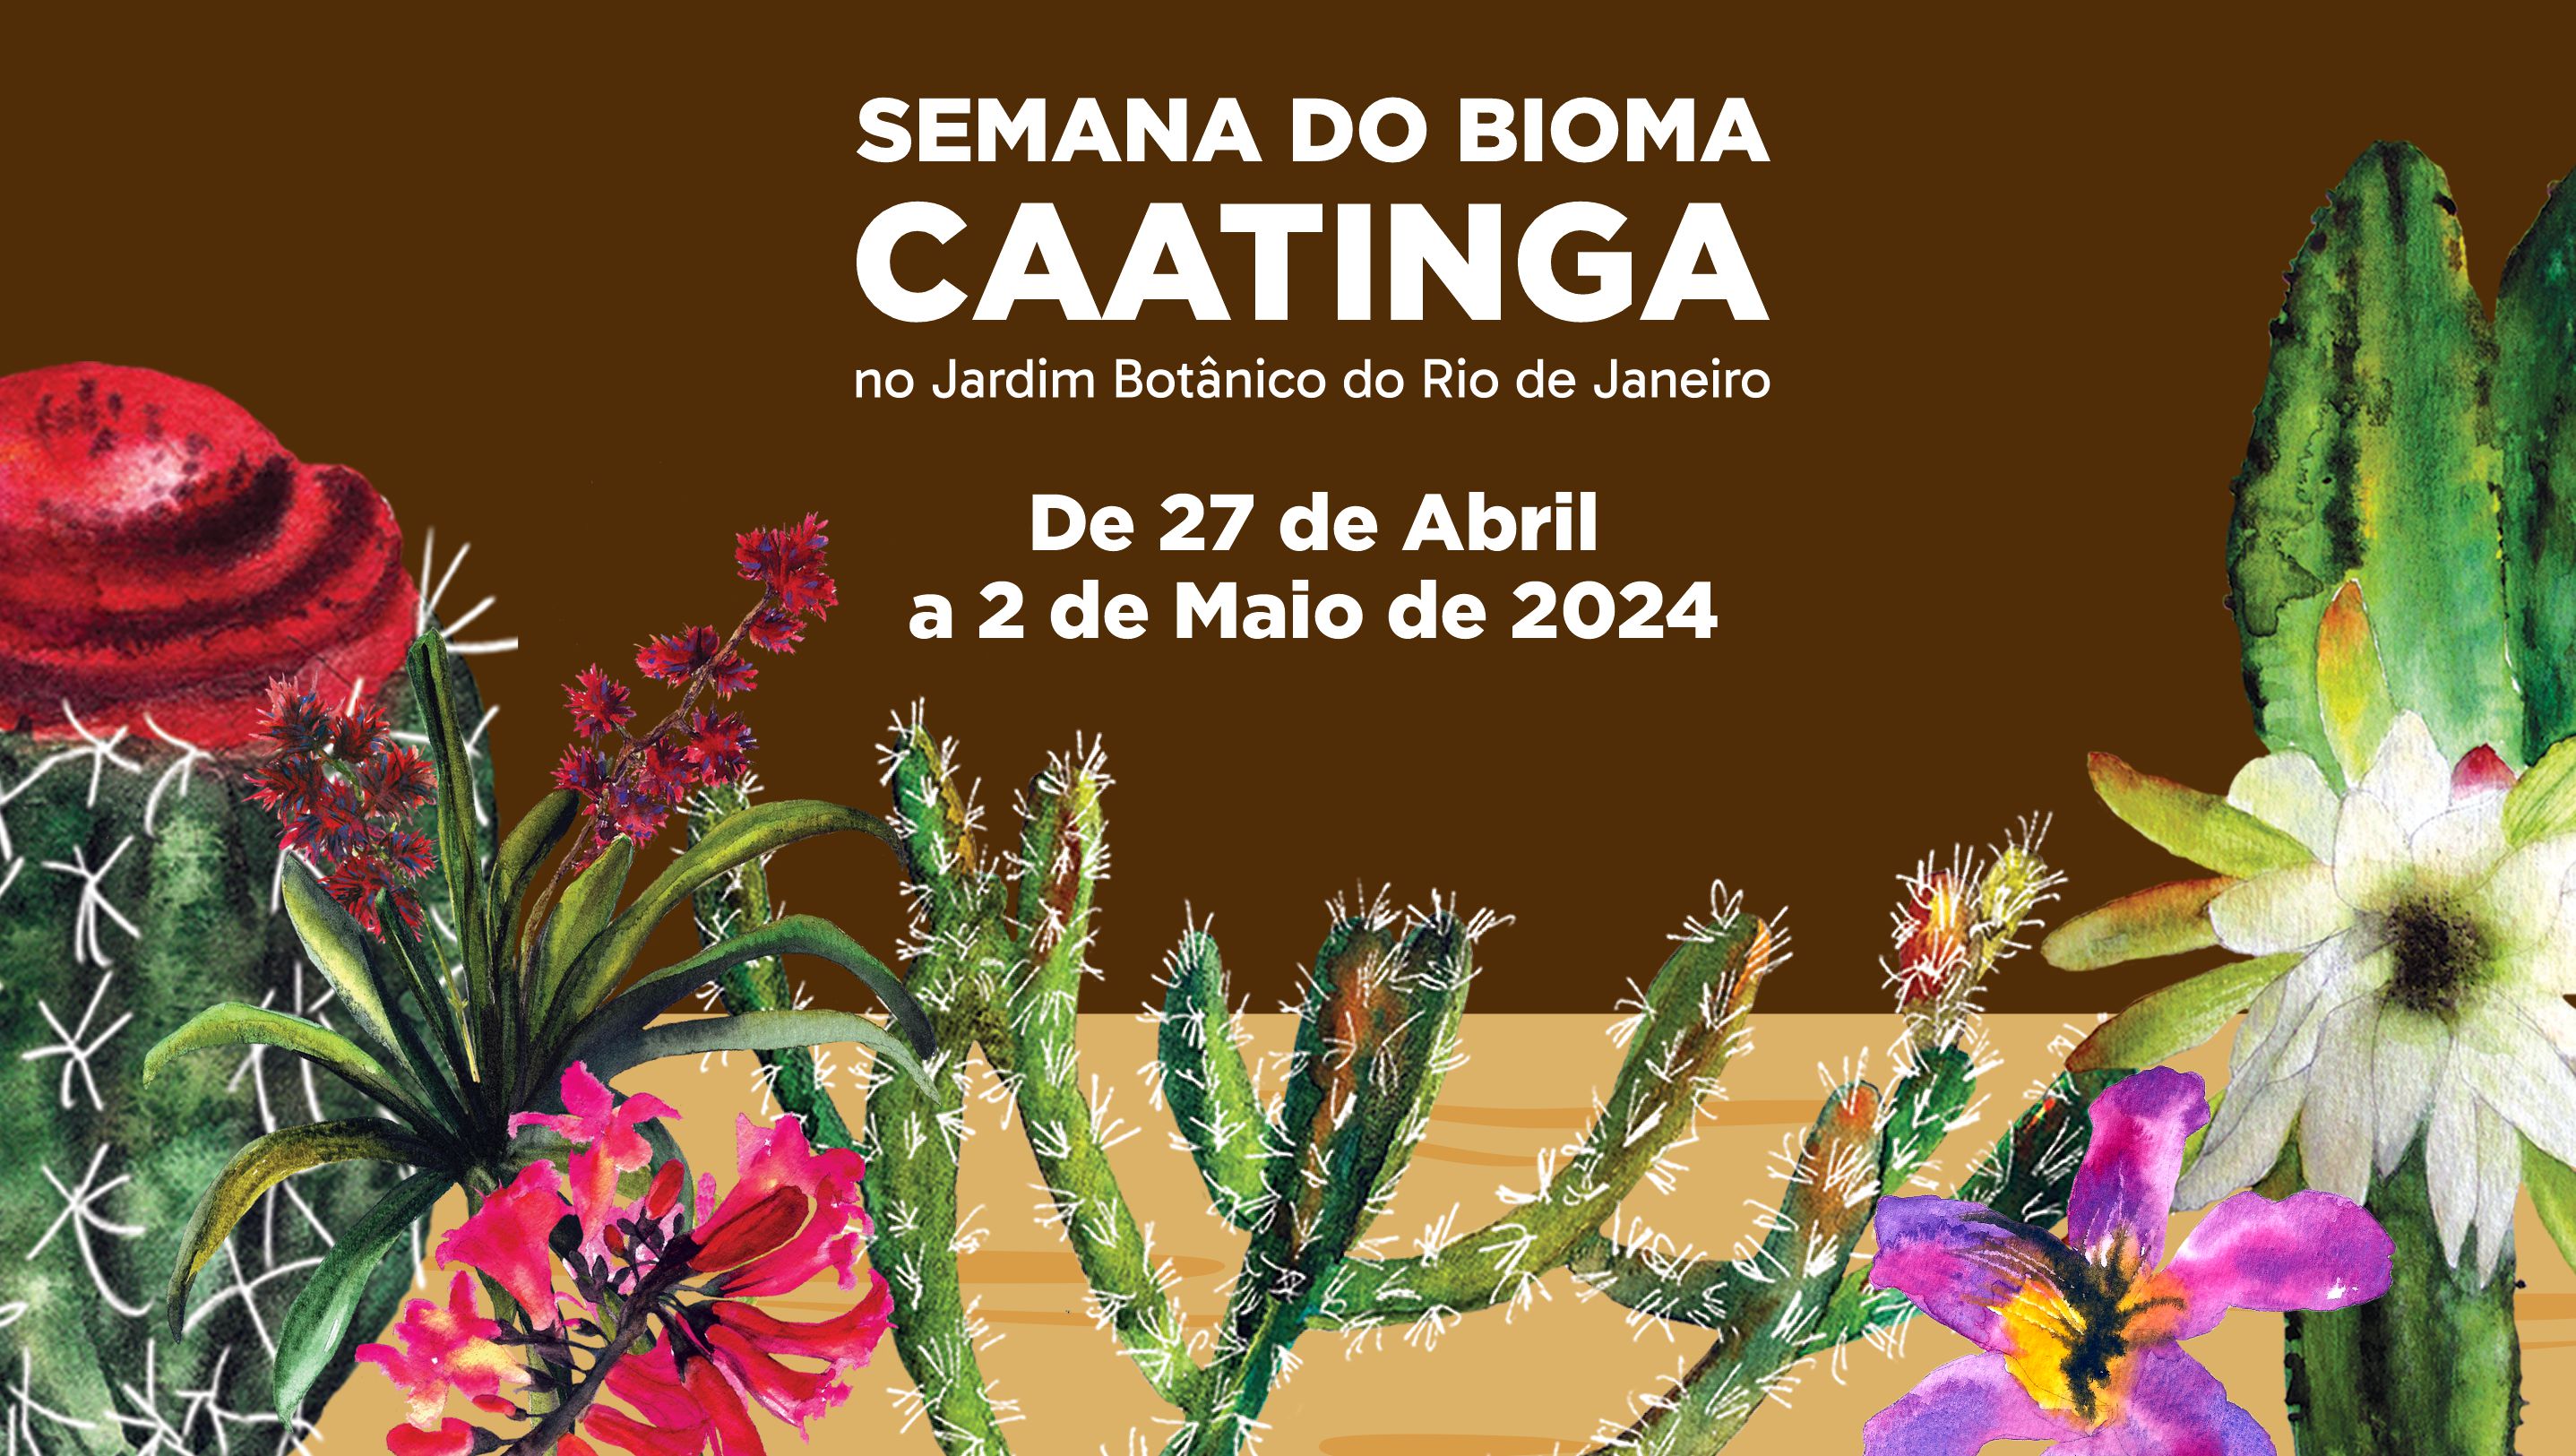 Caatinga Week at the Rio Botanical Garden celebrates the biodiversity and culture of the Northeast